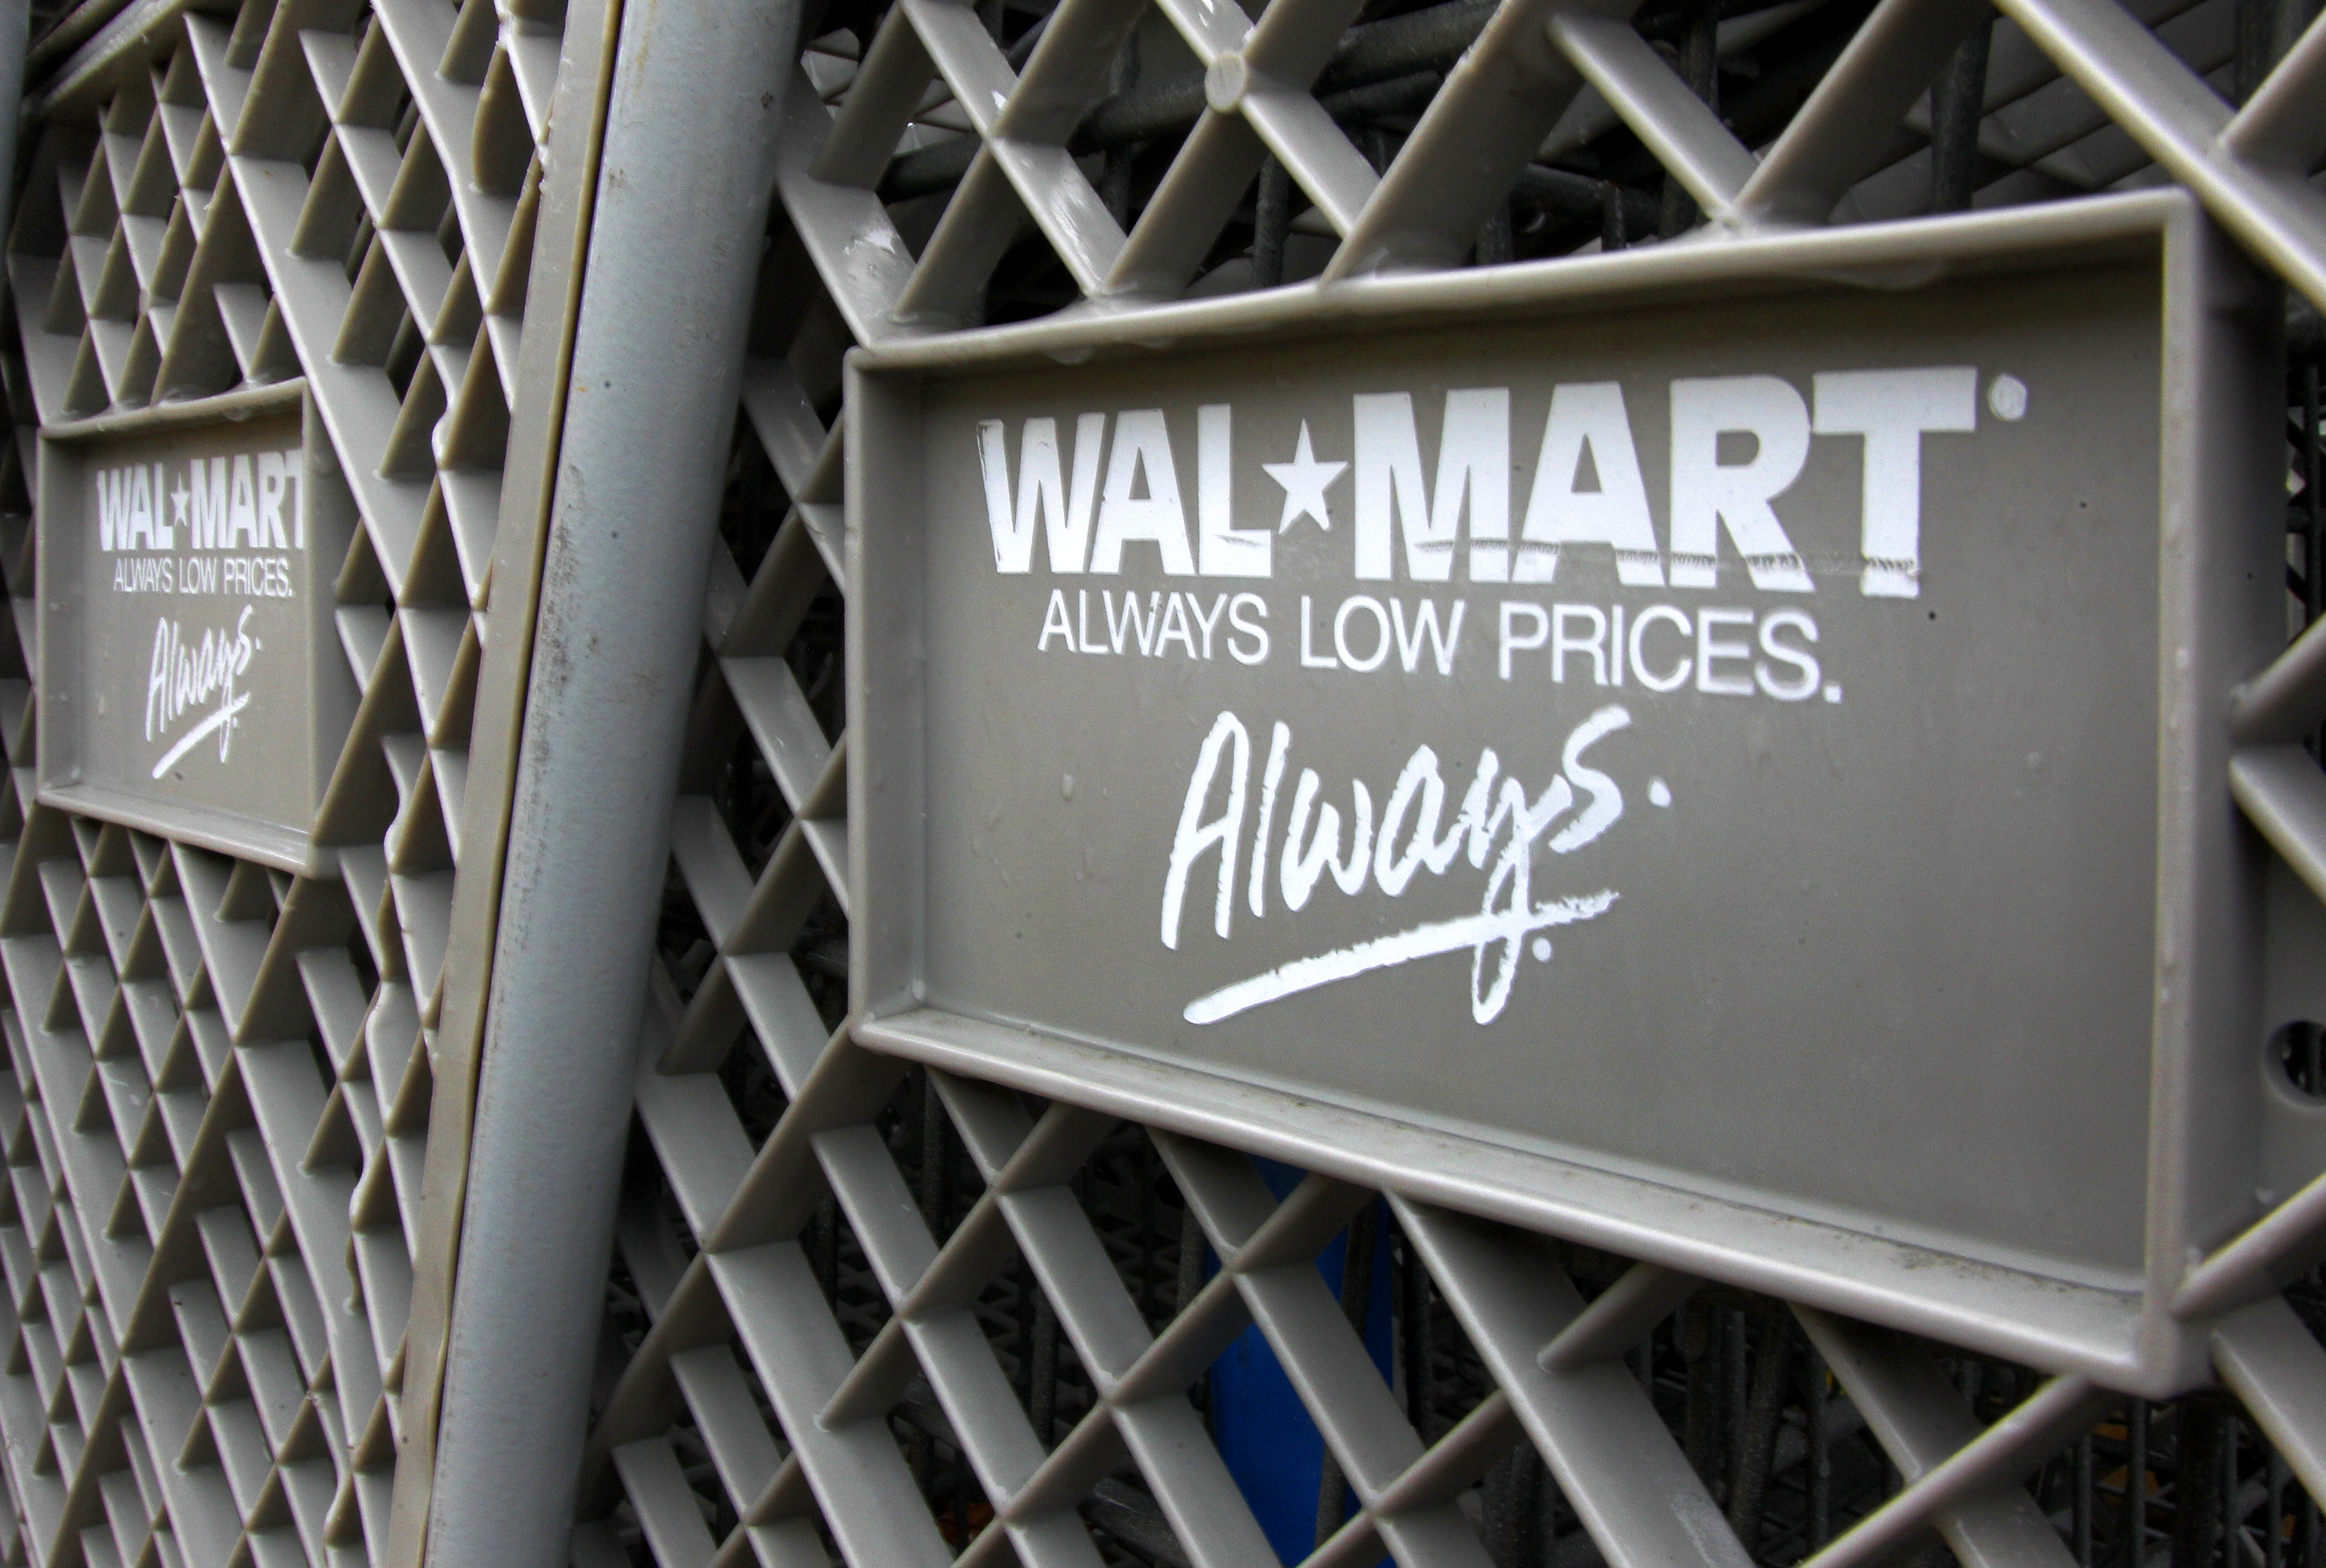 Labor Board Sides With Workers: Walmart Can’t Silence Employees Any Longer